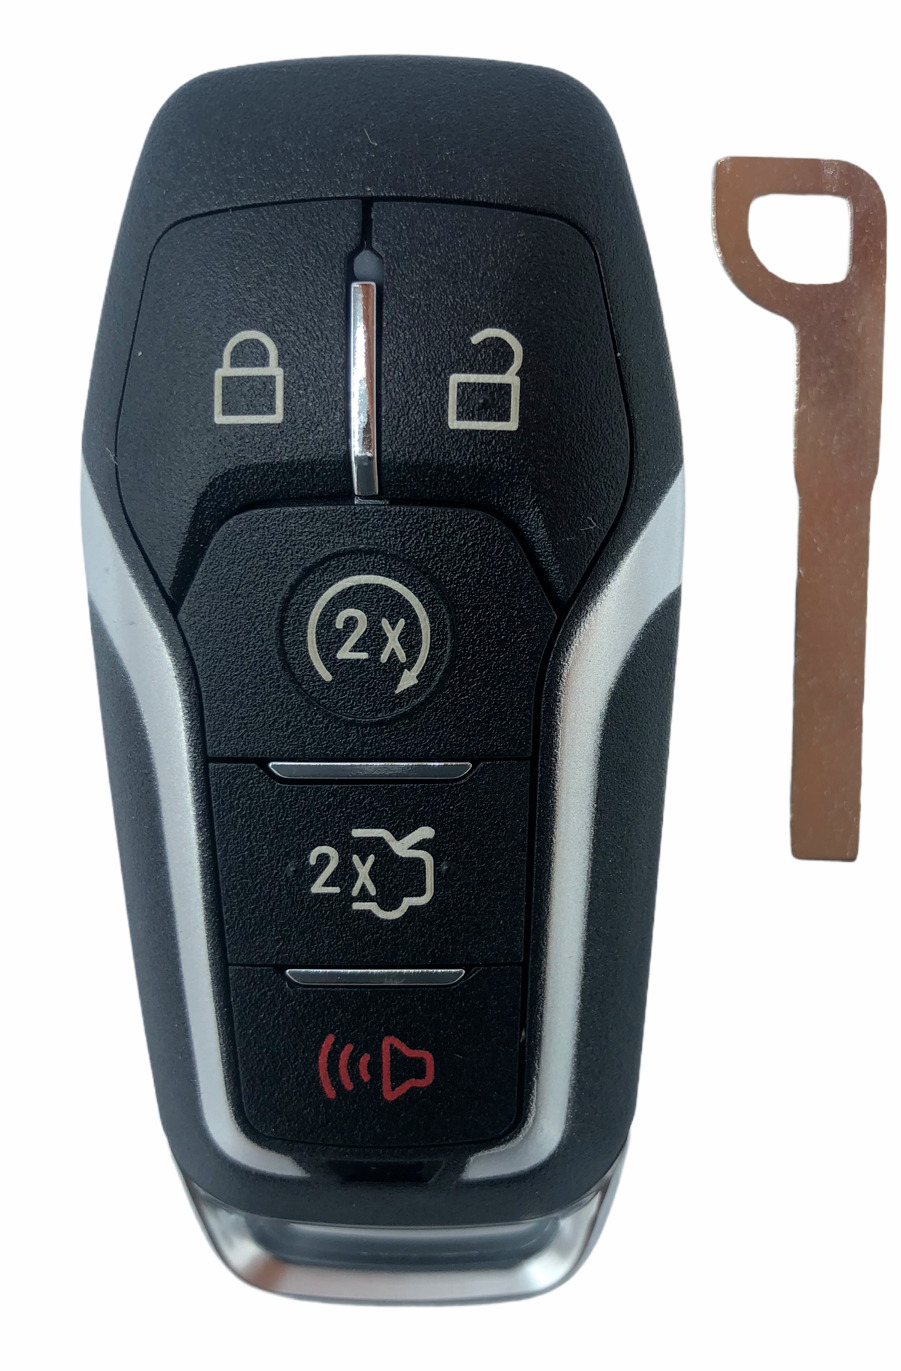 Replacement For 2013-2017 Ford Smart Remote Key Fob FCC M3N-A2C31243300 902 MHZ